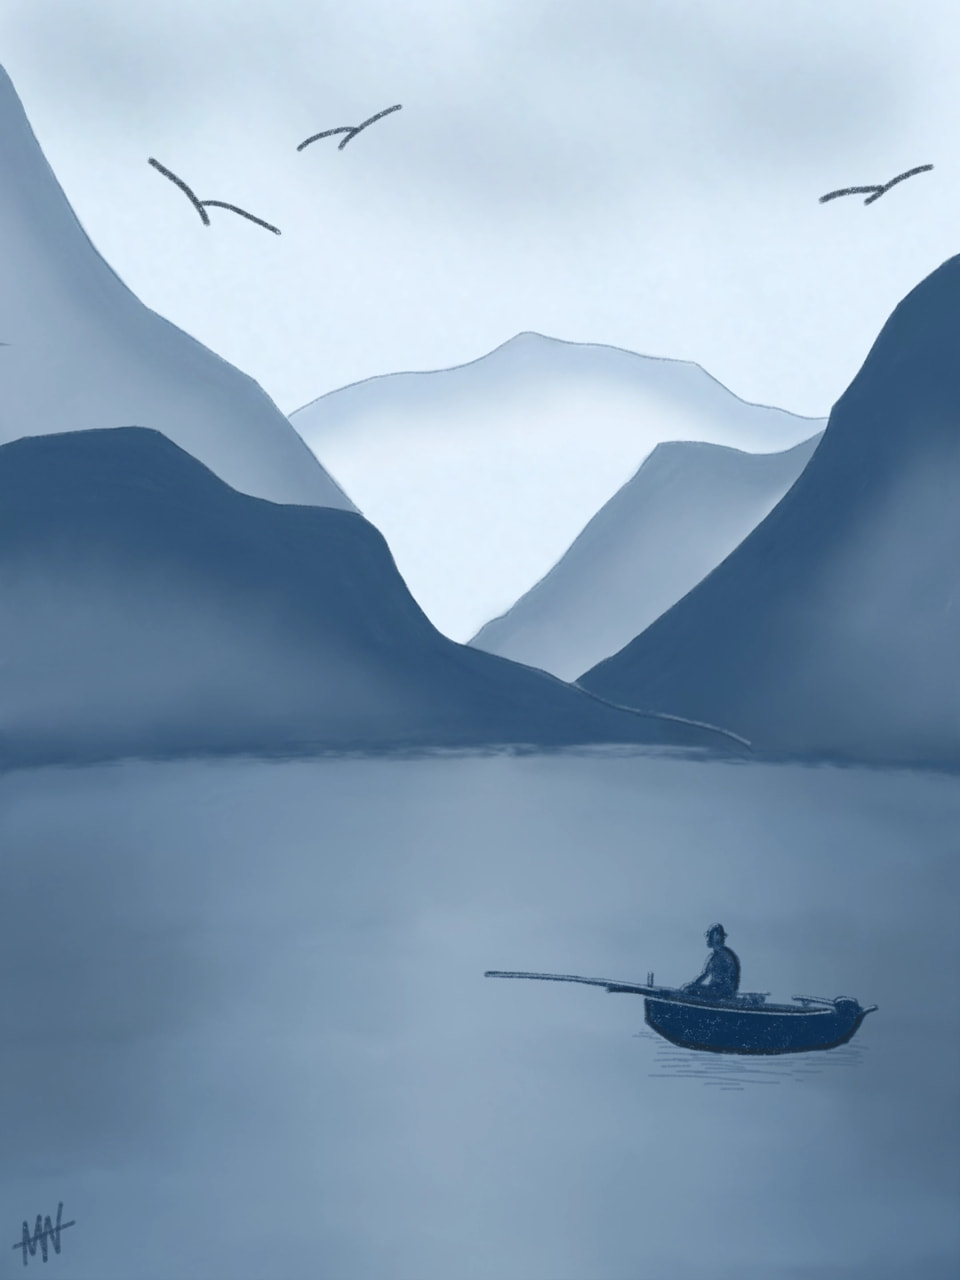 Fishing Blues - Re-upload. Thank you all for supporting me and getting this sketch onto the featured board, hopefully it will be the first of many. :)  #onecolor #fridayswithsketch #fishing #blue